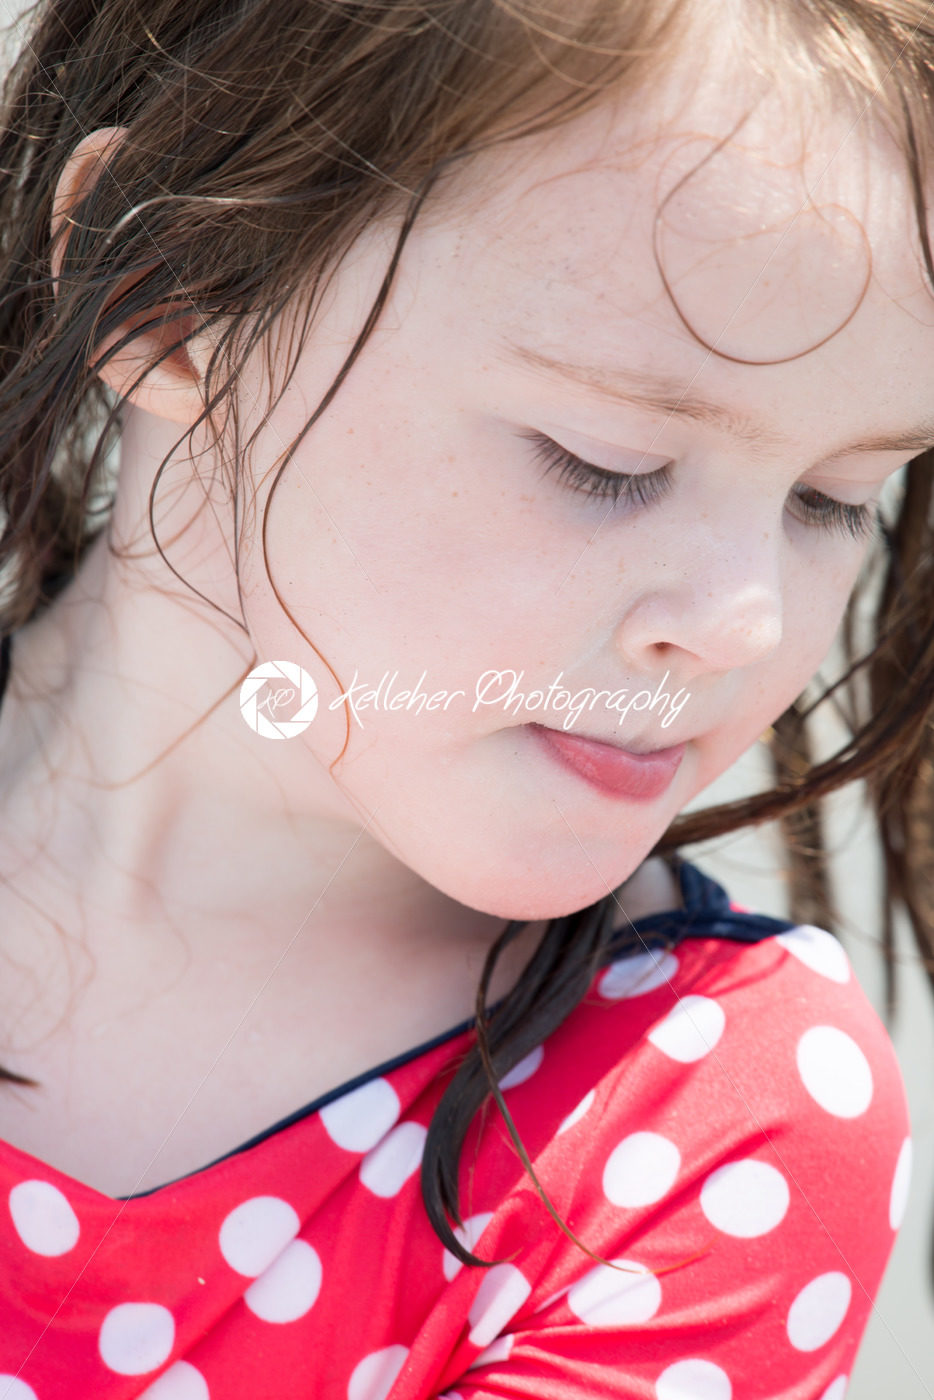 yound toddler girl having fun digging in the sand at the beach - Kelleher Photography Store